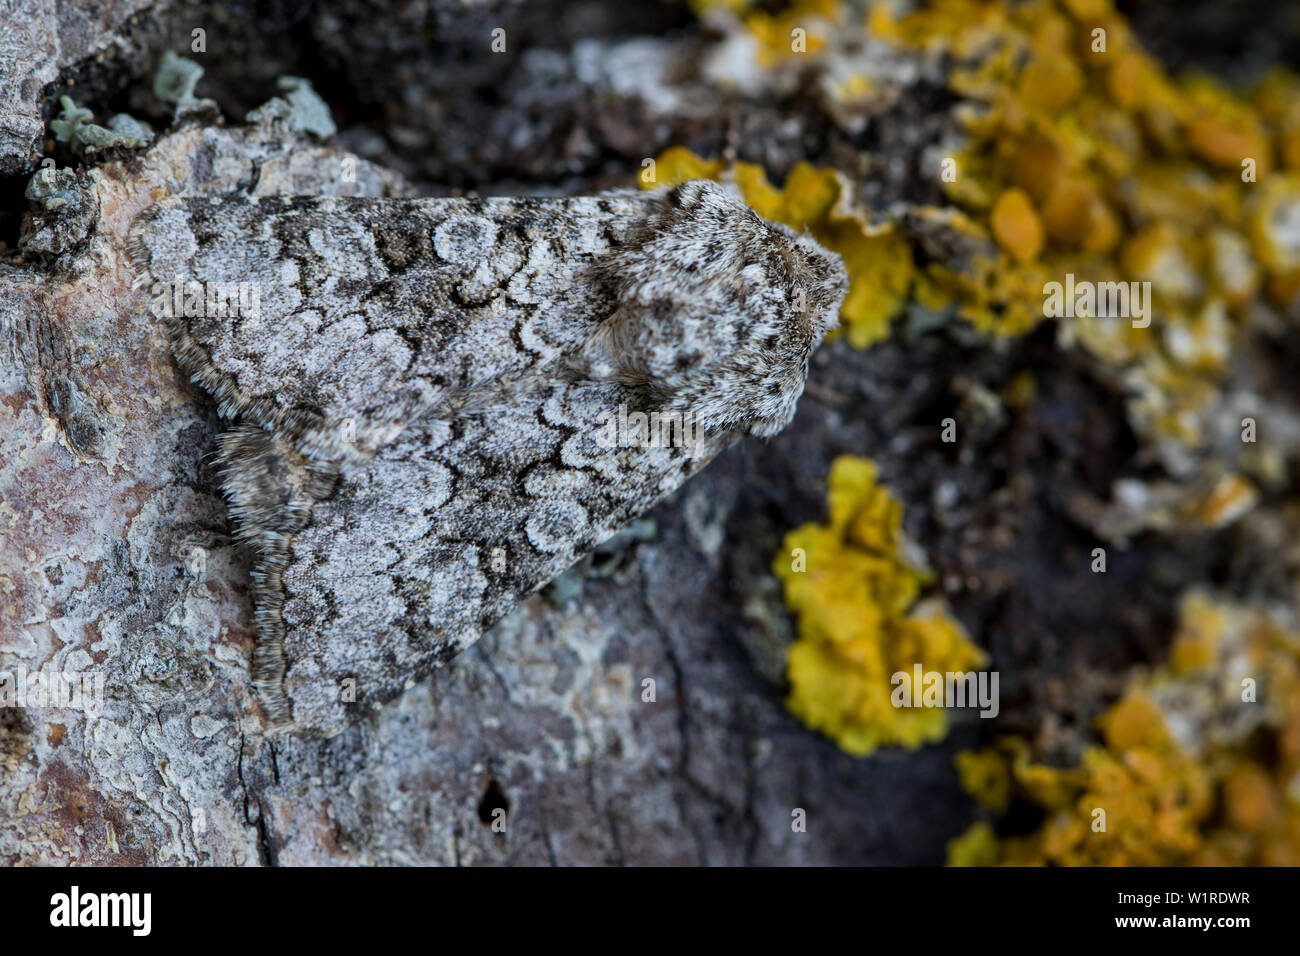 Hecatera weissi Up close perched on the bark of Stock Photo